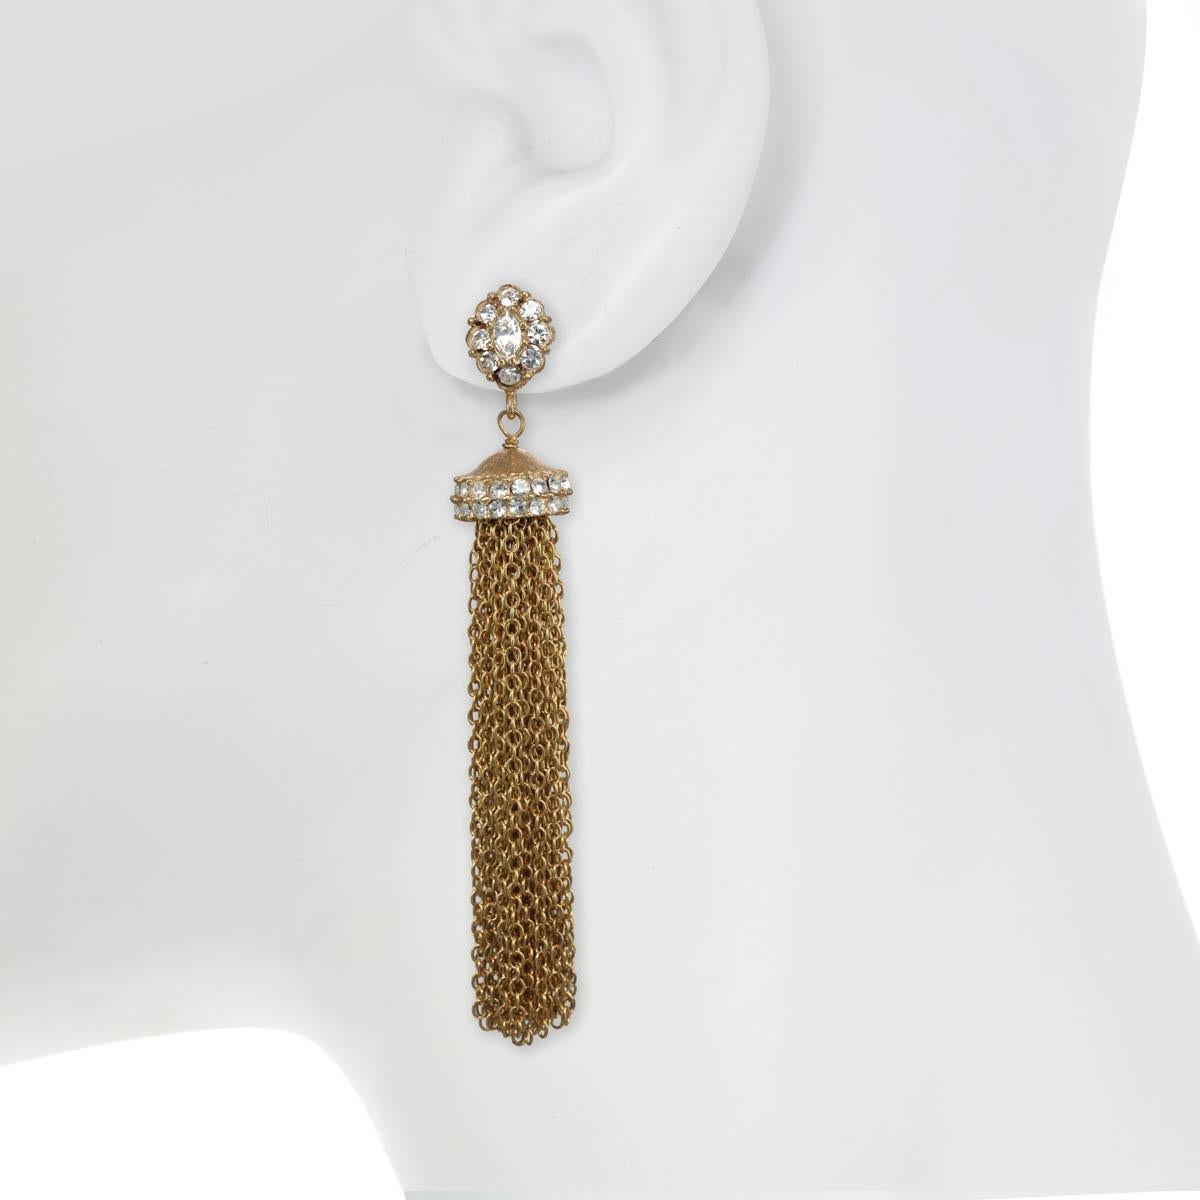 Tassels are timelessly chic and the perfect accessory for every season and every occasion!  A showroom show stopper, these earrings are perfect accessory to wear from day to night. 

PLEASE NOTE: The pieces available are not vintage and are not